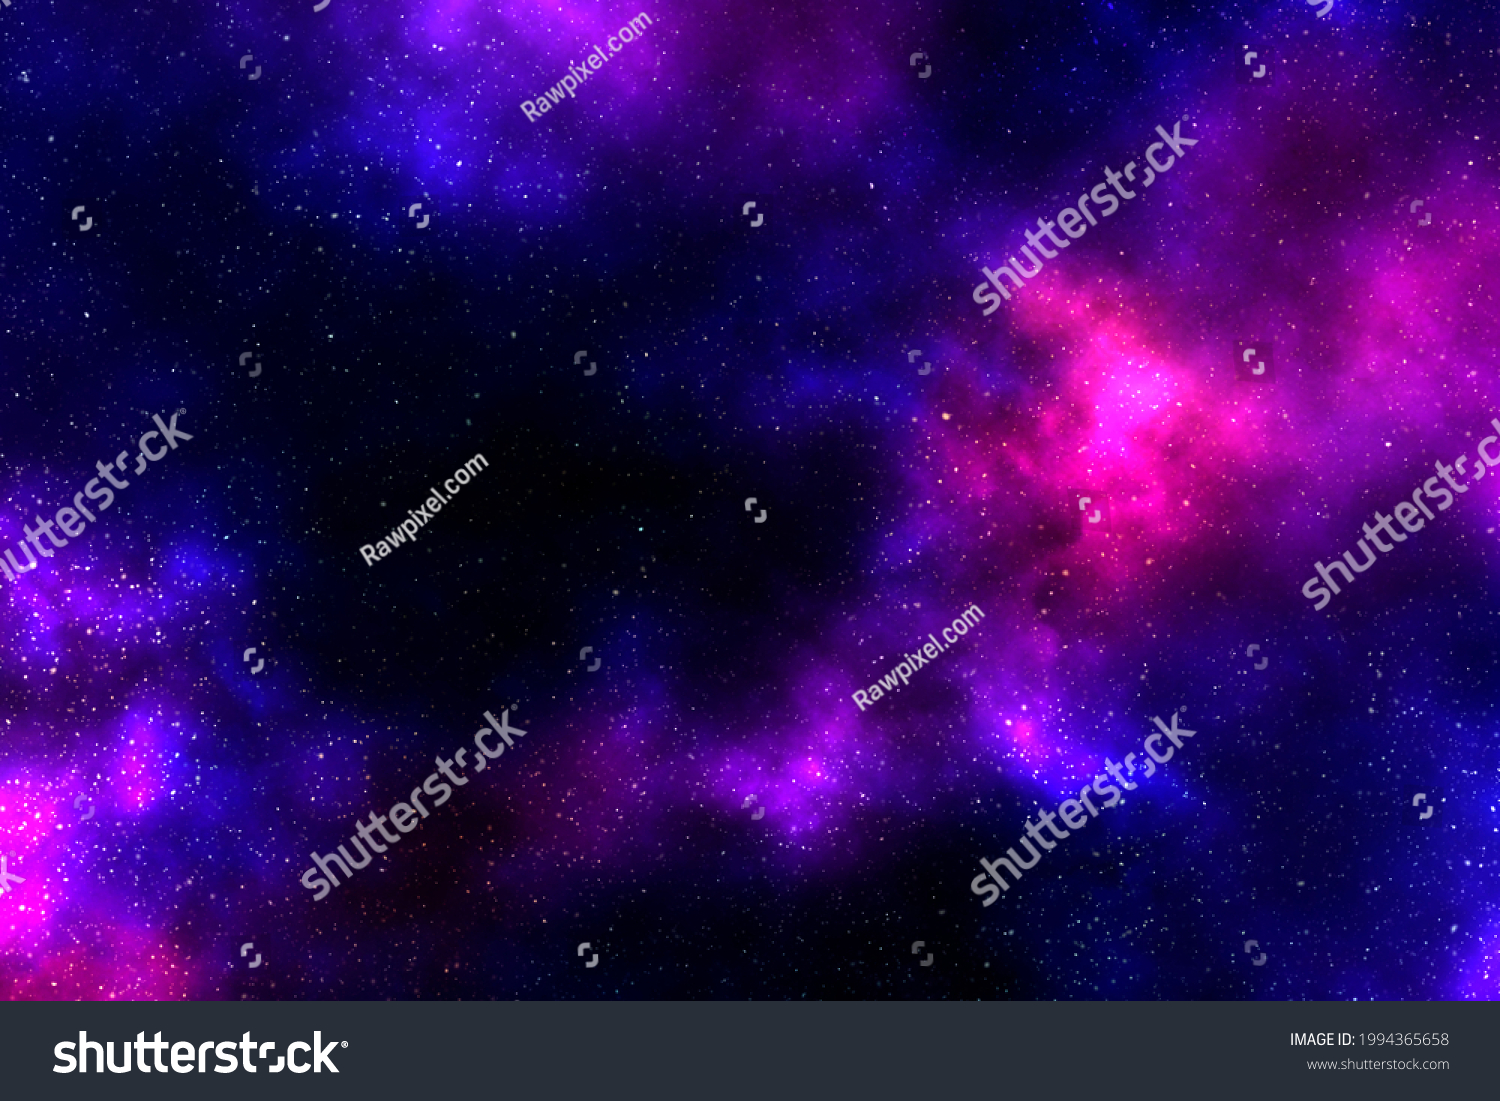 Dark pink and purple galaxy patterned background #1994365658